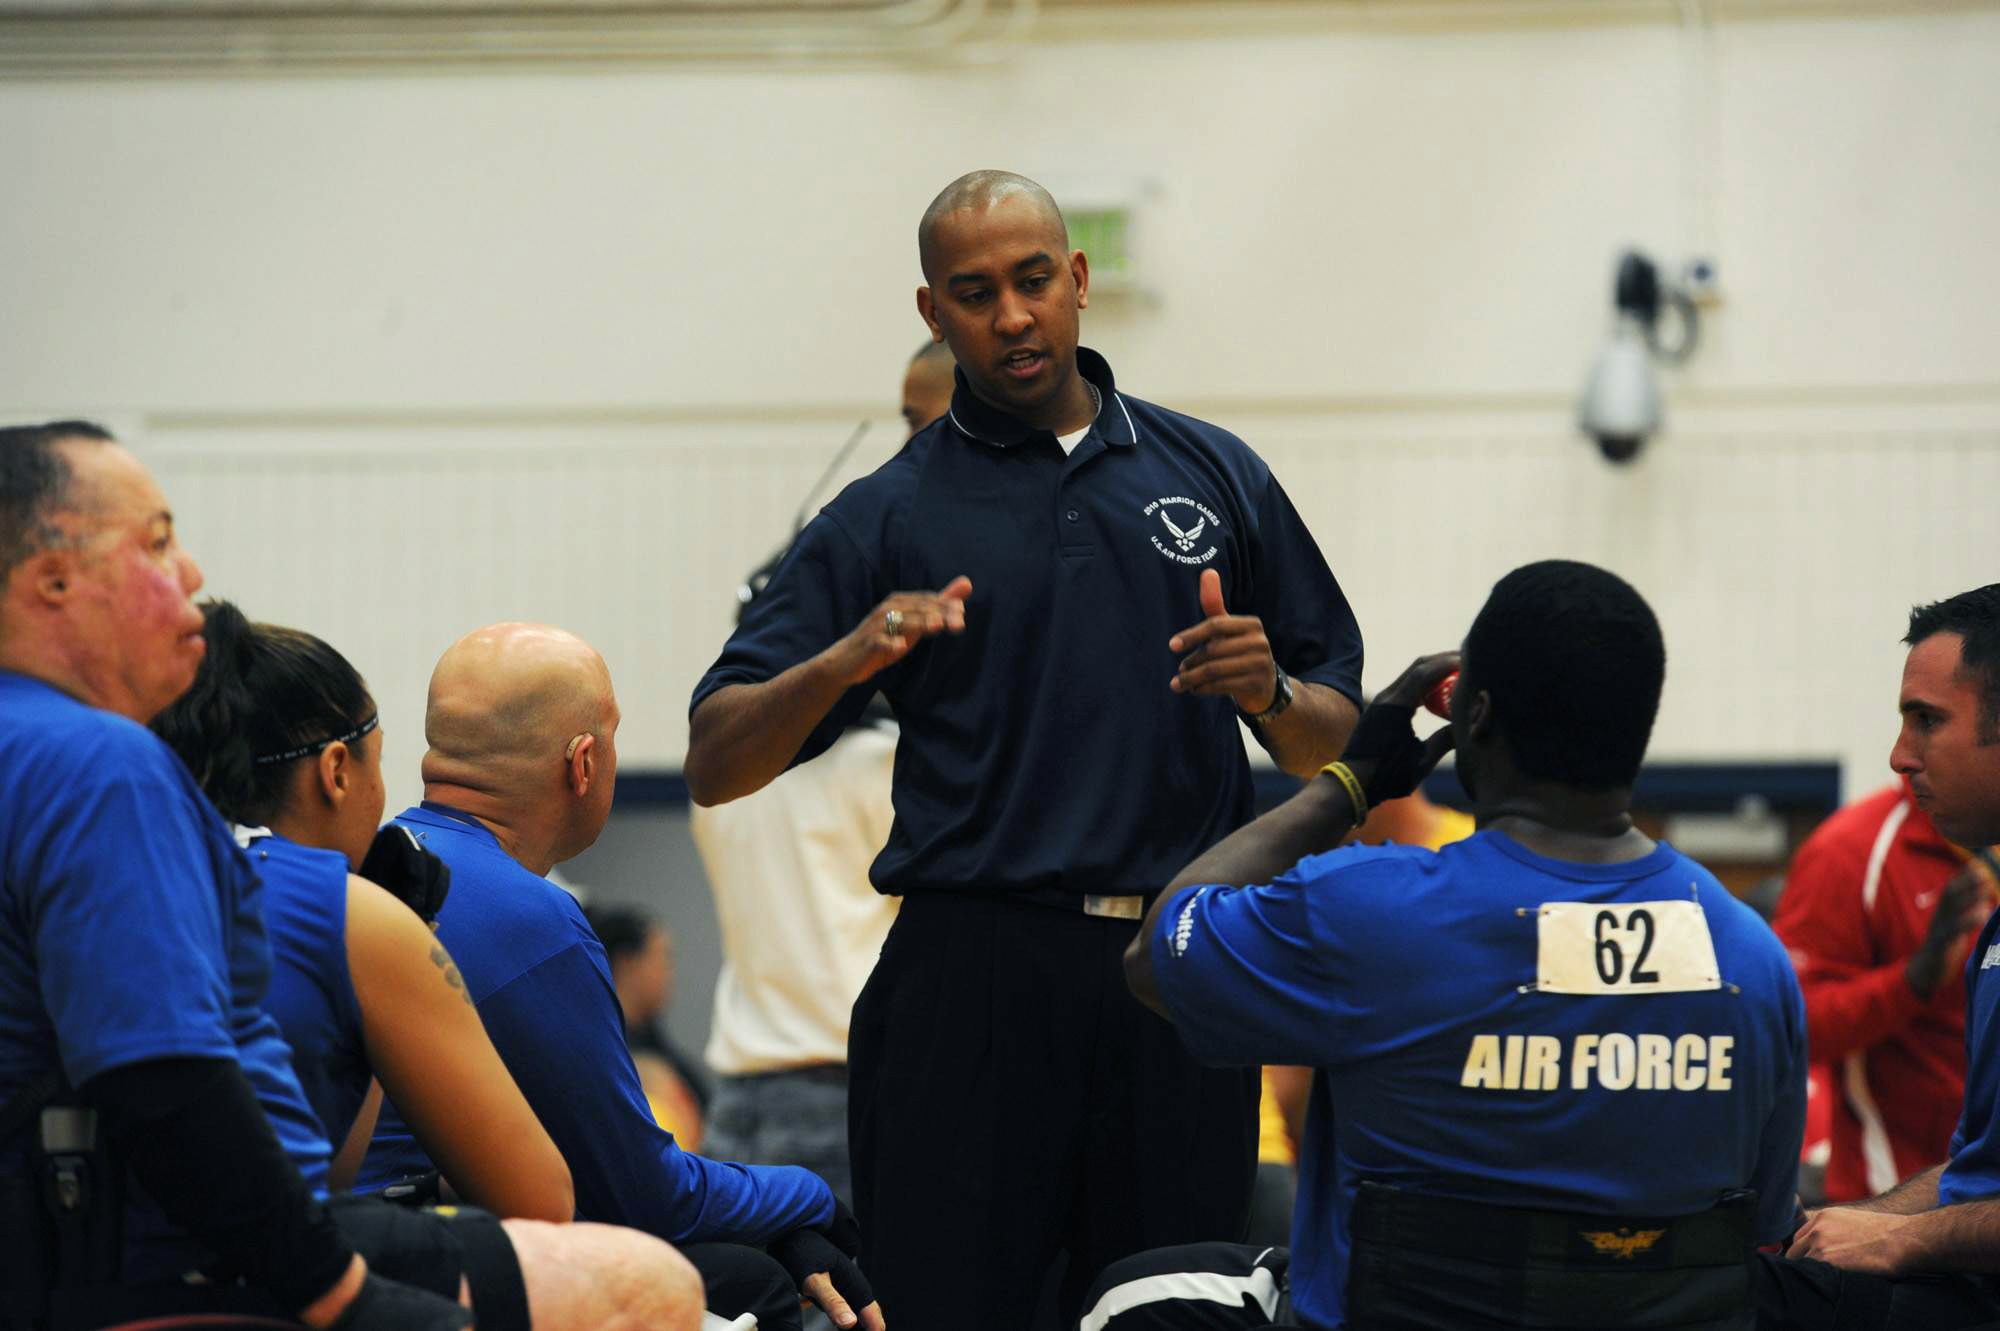 1st. Lt. Dan Taylor, Air Force wheelchair basketball coach, talks strategy with his team May 11, 2010, during the first game of the Warrior Games wheelchair basketball competition. The Warrior Games began May 10 and finish on May 14 and are taking place at the U.S. Olympic Training Center in Colorado Springs, Colo. (U.S. Air Force photo/Staff Sgt. Desiree N. Palacios)